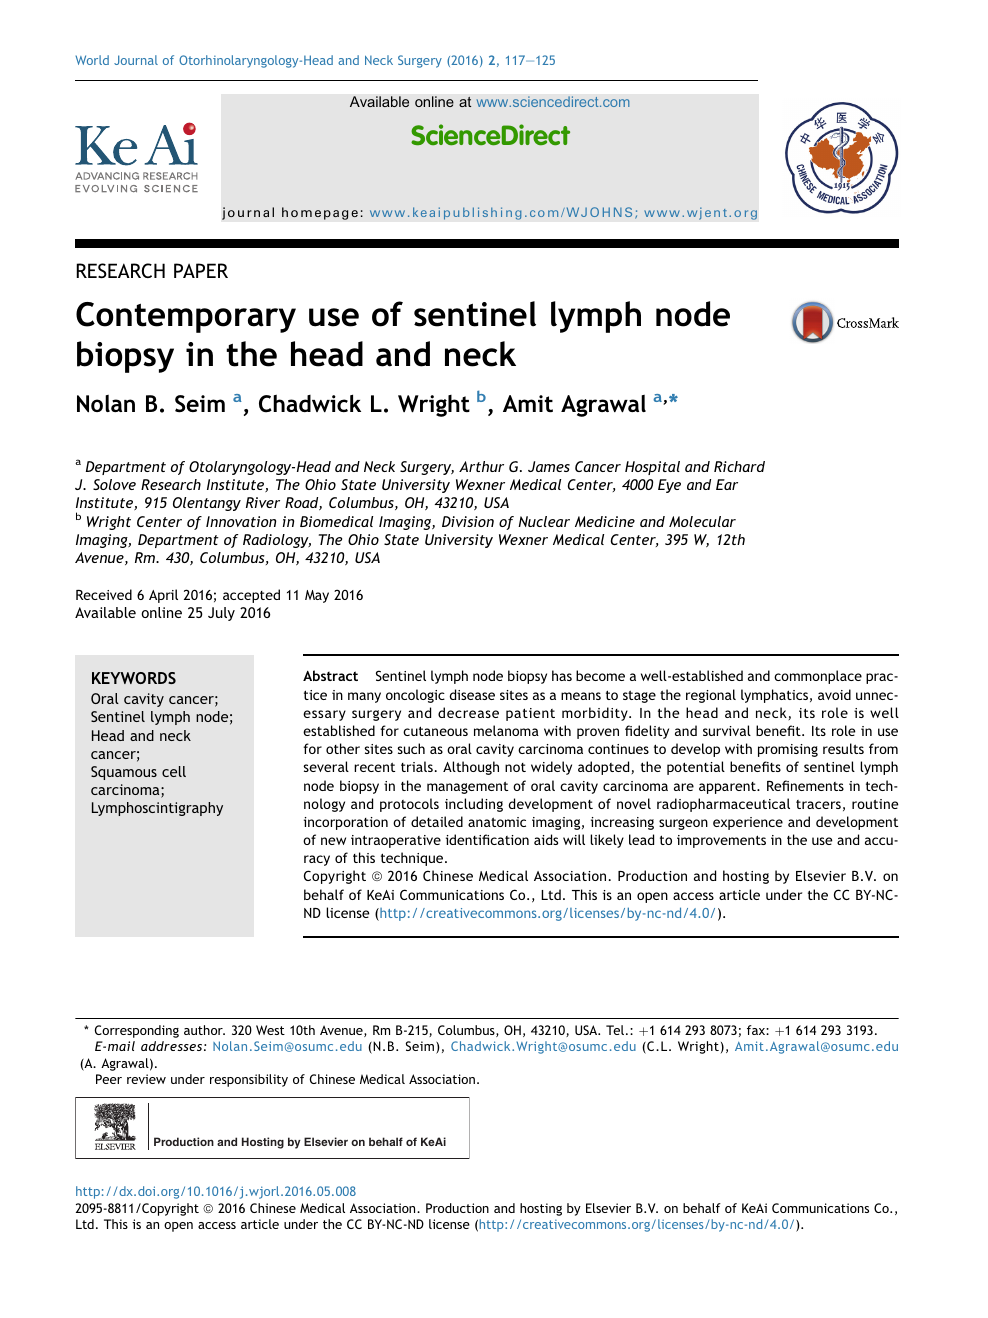 Contemporary Use Of Sentinel Lymph Node Biopsy In The Head And Neck Topic Of Research Paper In Clinical Medicine Download Scholarly Article Pdf And Read For Free On Cyberleninka Open Science